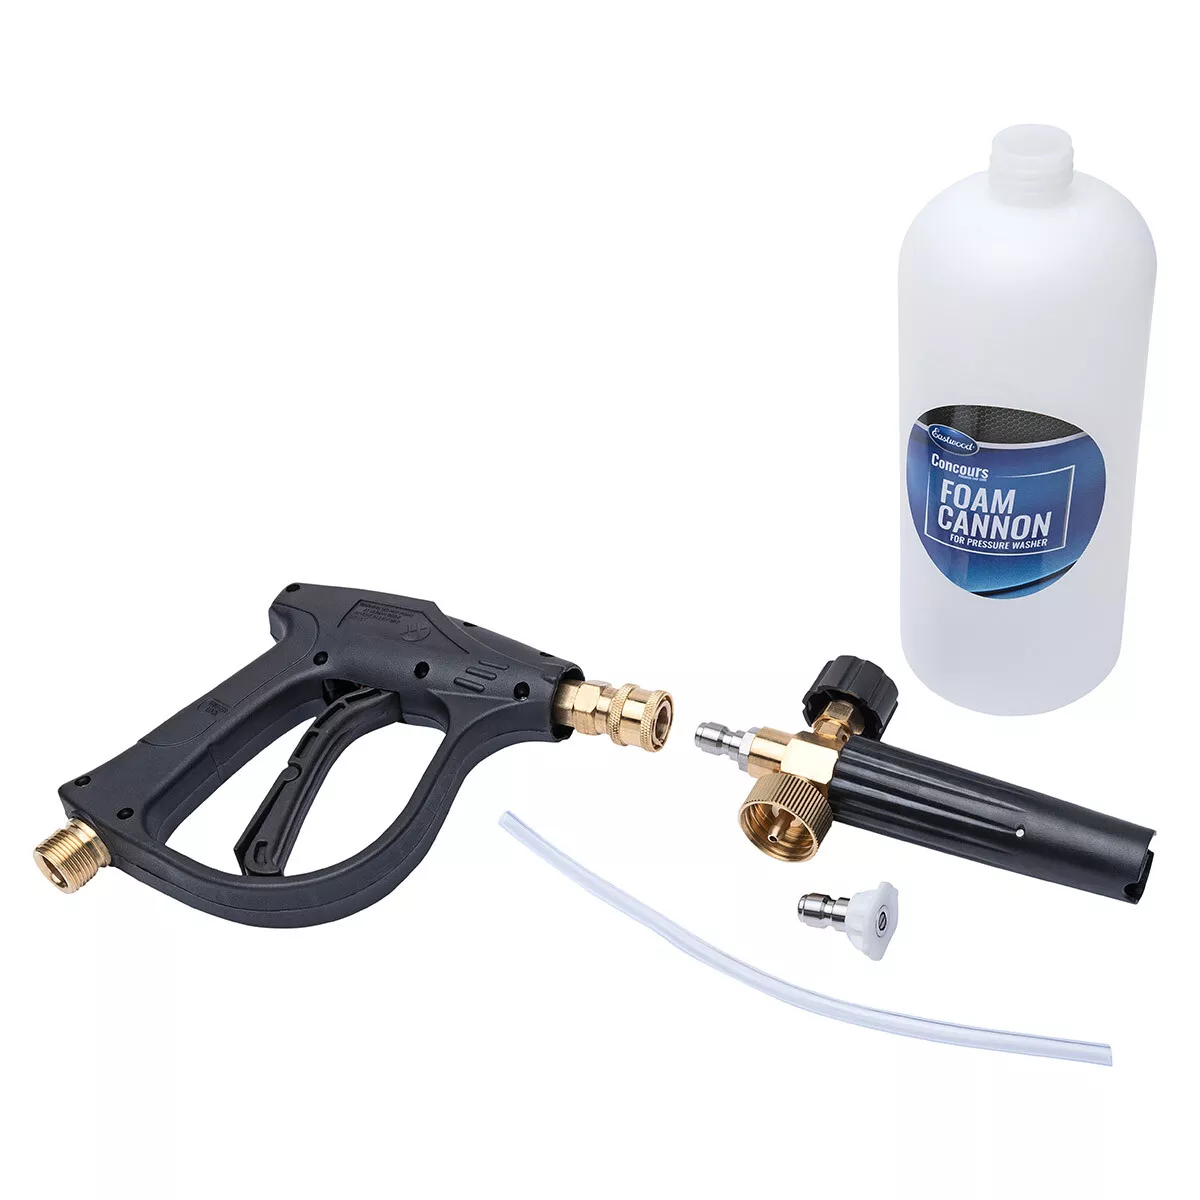 Eastwood Concours Foam Cannon for Pressure Washer Car Washing 66330